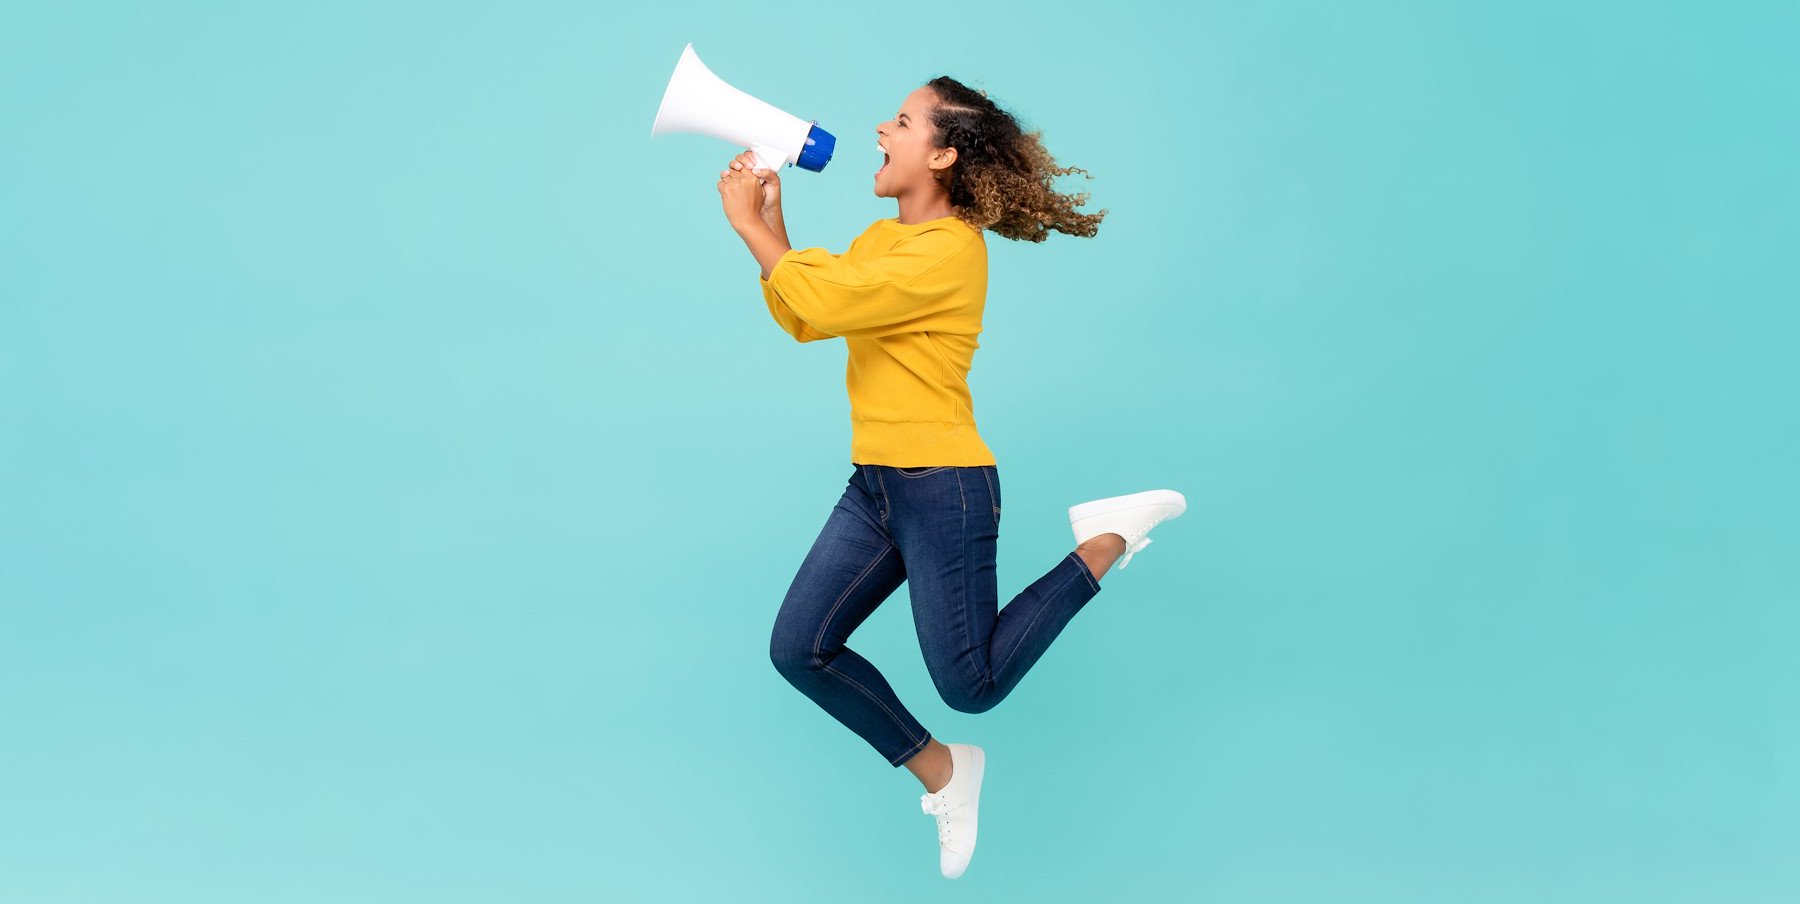 Girl with megaphone jumping and shouting